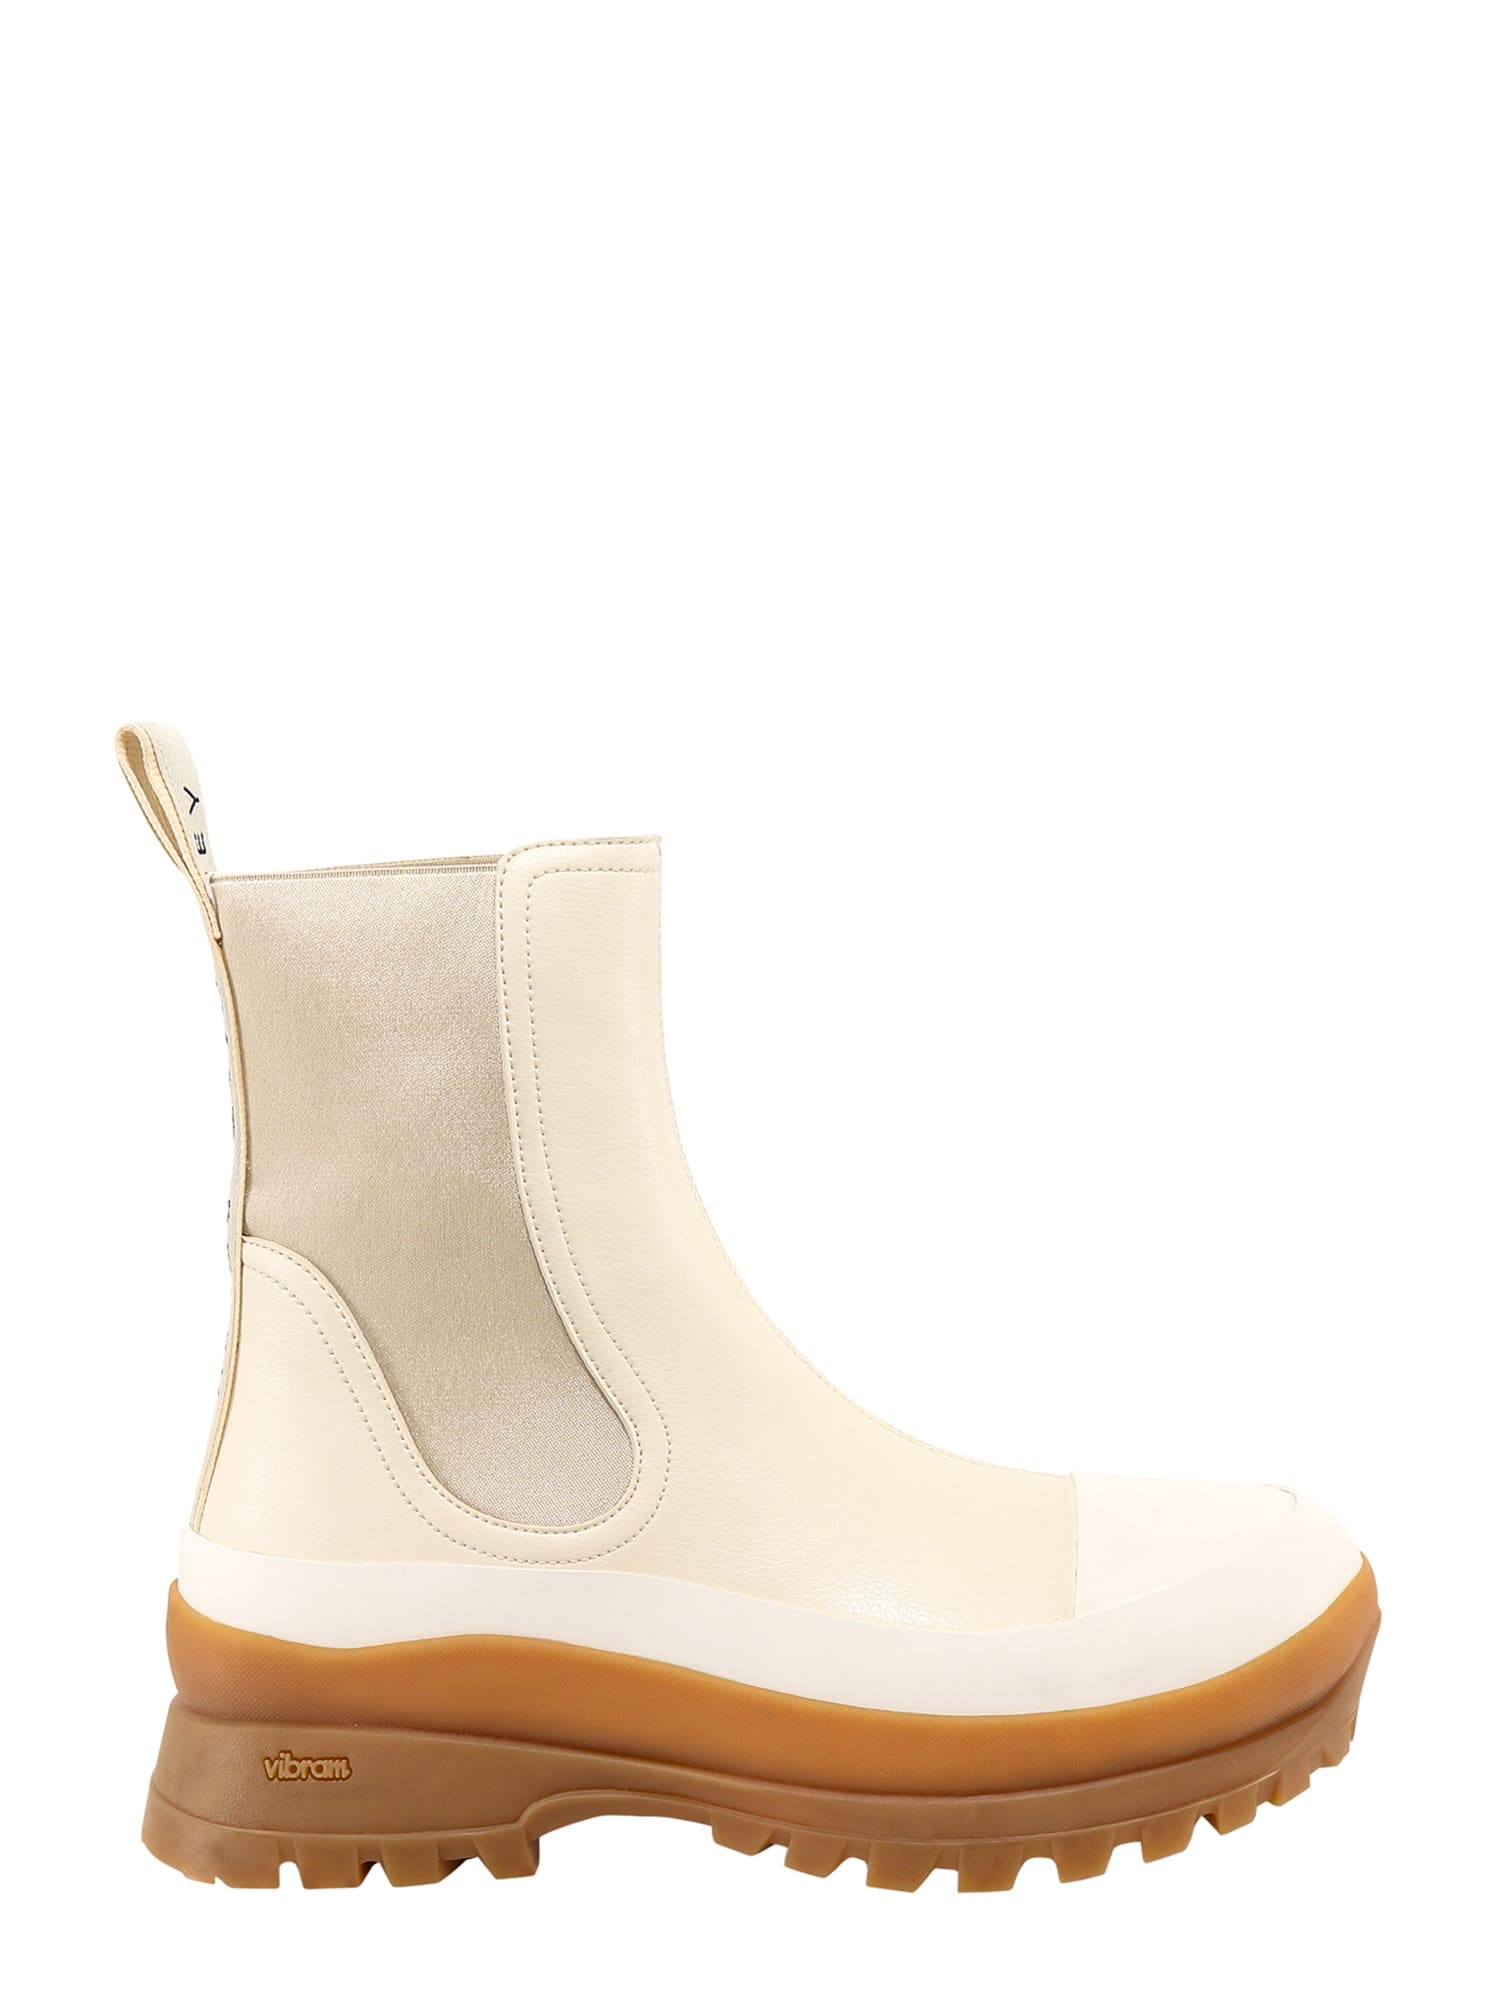 Buy Stella McCartney Chelsea Trace Ankle Boots online, shop Stella McCartney shoes with free shipping